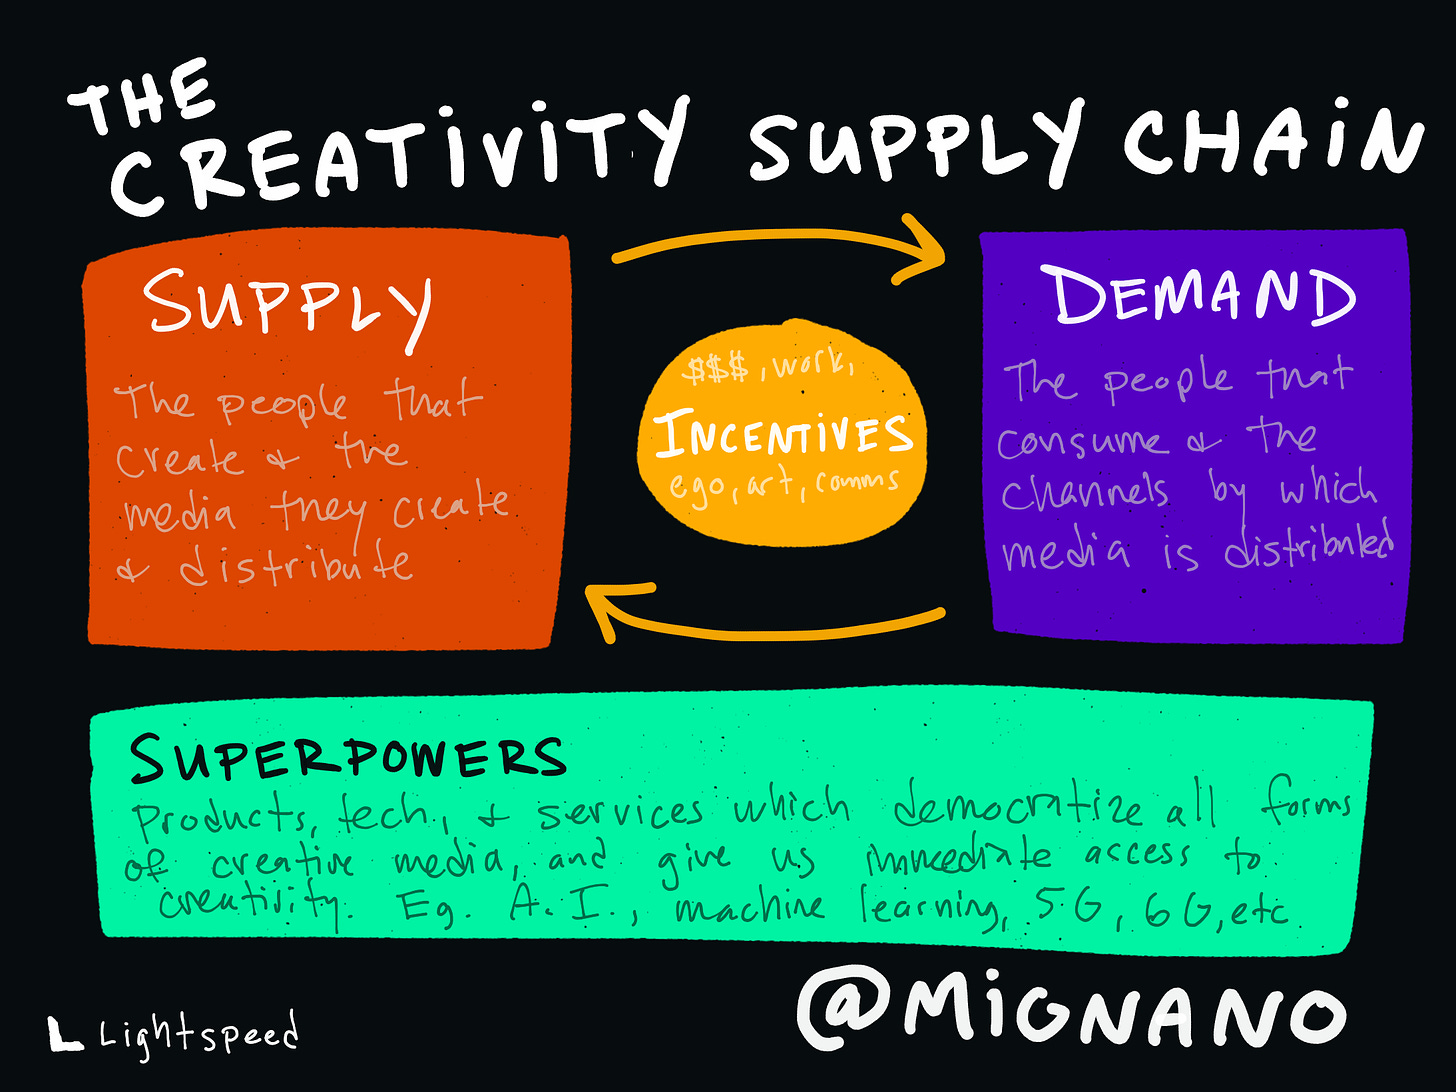 A chart illustrating the Creativity Supply Chain, by Michael Mignano. The Creativity Supply Chain is the supply, demand, incentives, and superpowers that make up our modern Internet economy.